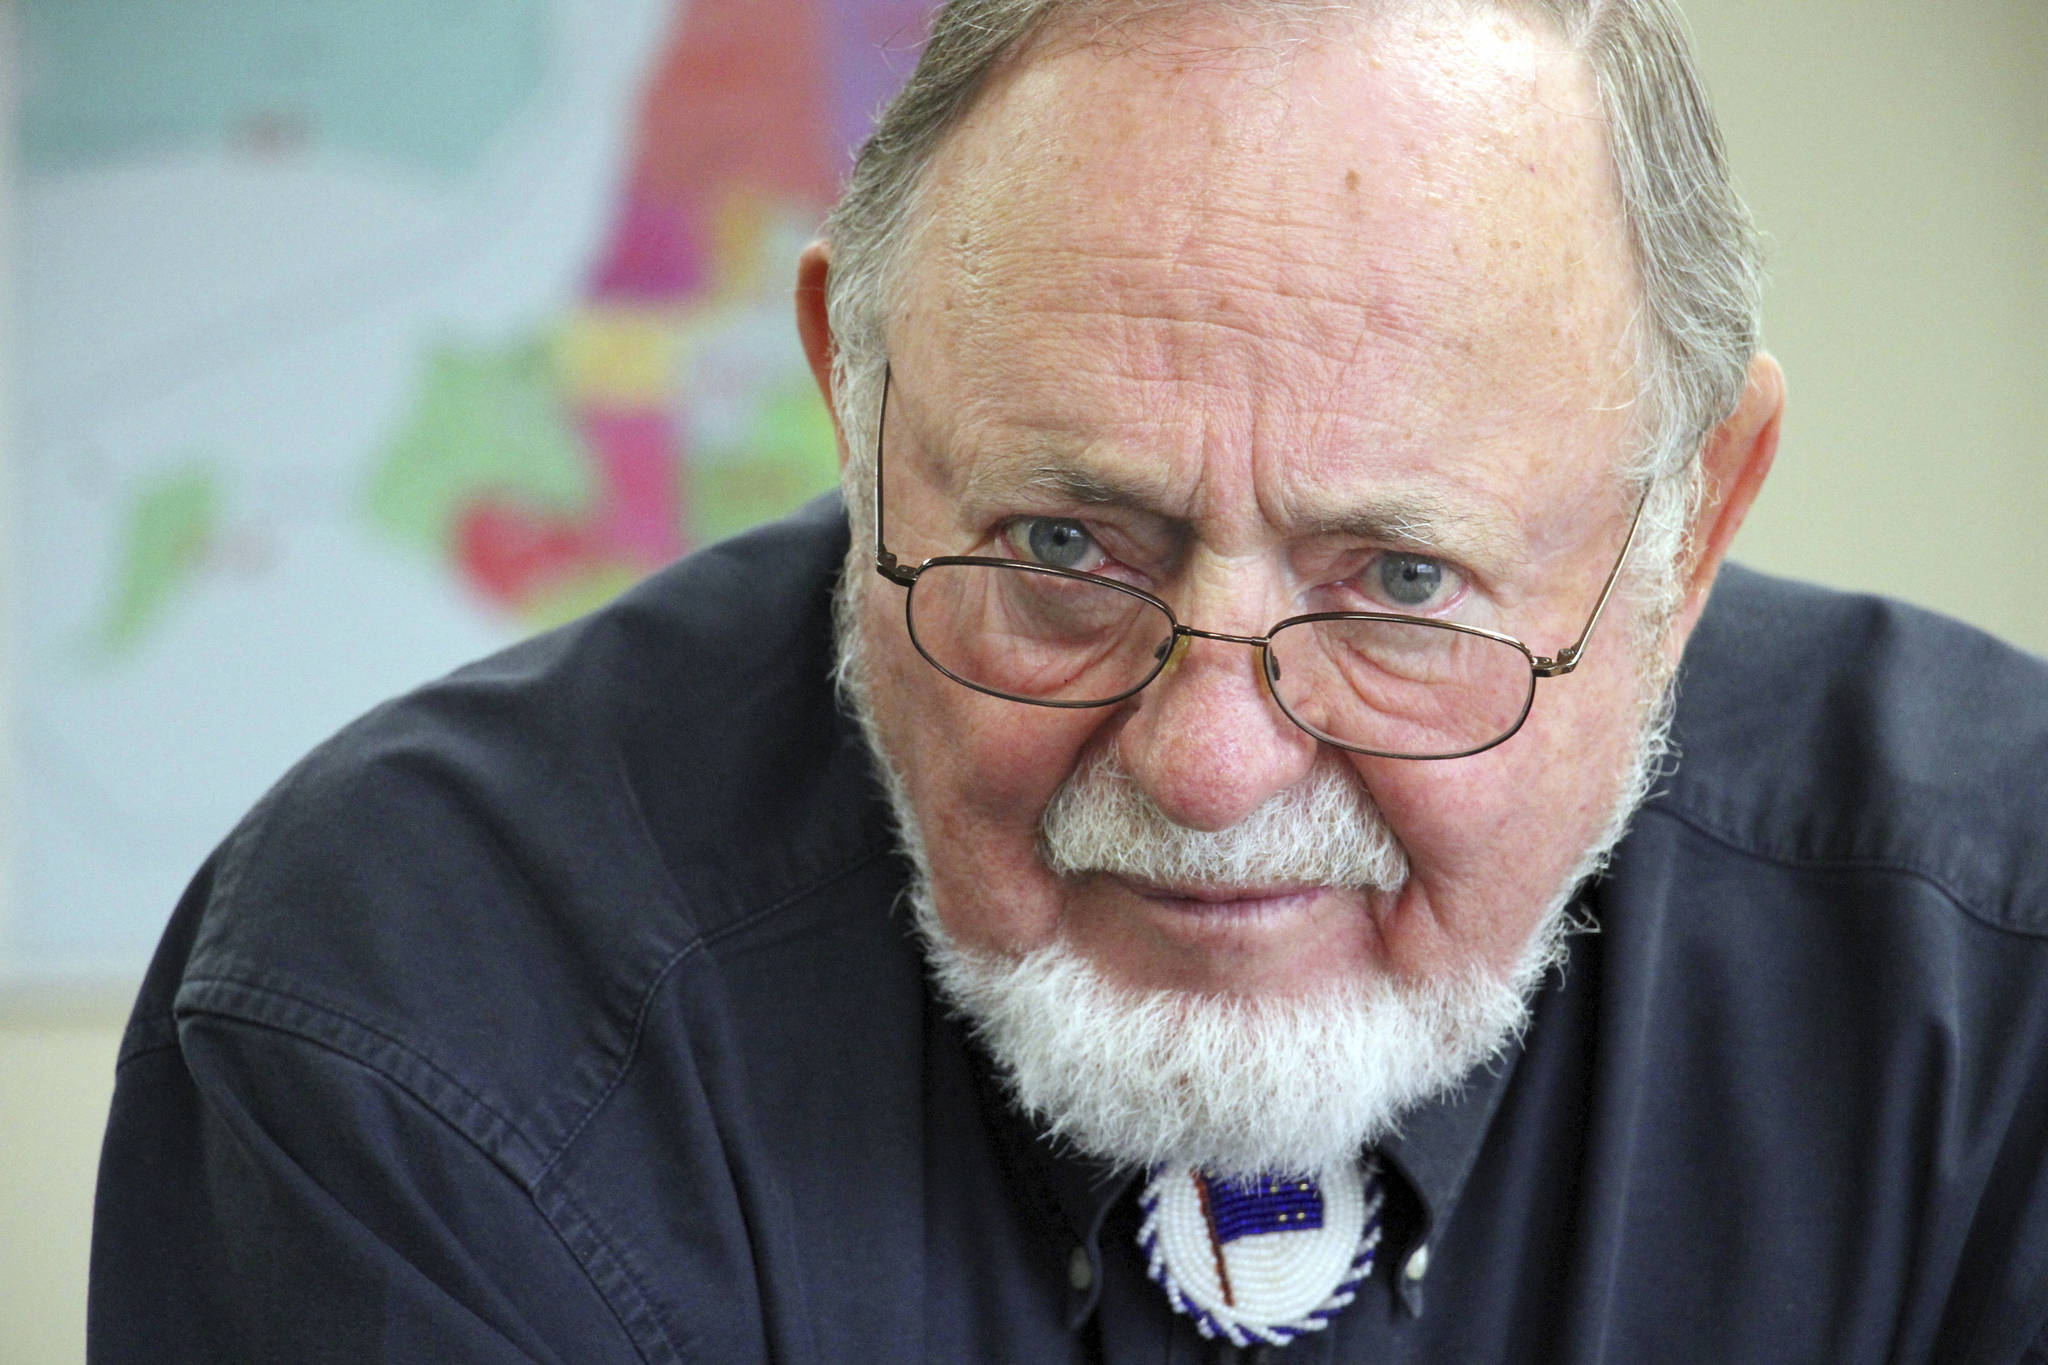 In this June 2019 photo, U.S. Rep. Don Young, answers a reporter’s question after filing paperwork for re-election at the Alaska Division of Elections in Anchorage, Alaska. Young, the longest-serving Republican ever in the U.S. House, has won his 25th term. Young defeated Alyse Galvin in back-to-back elections for Alaska’s sole seat in the House. (AP Photo/Mark Thiessen)